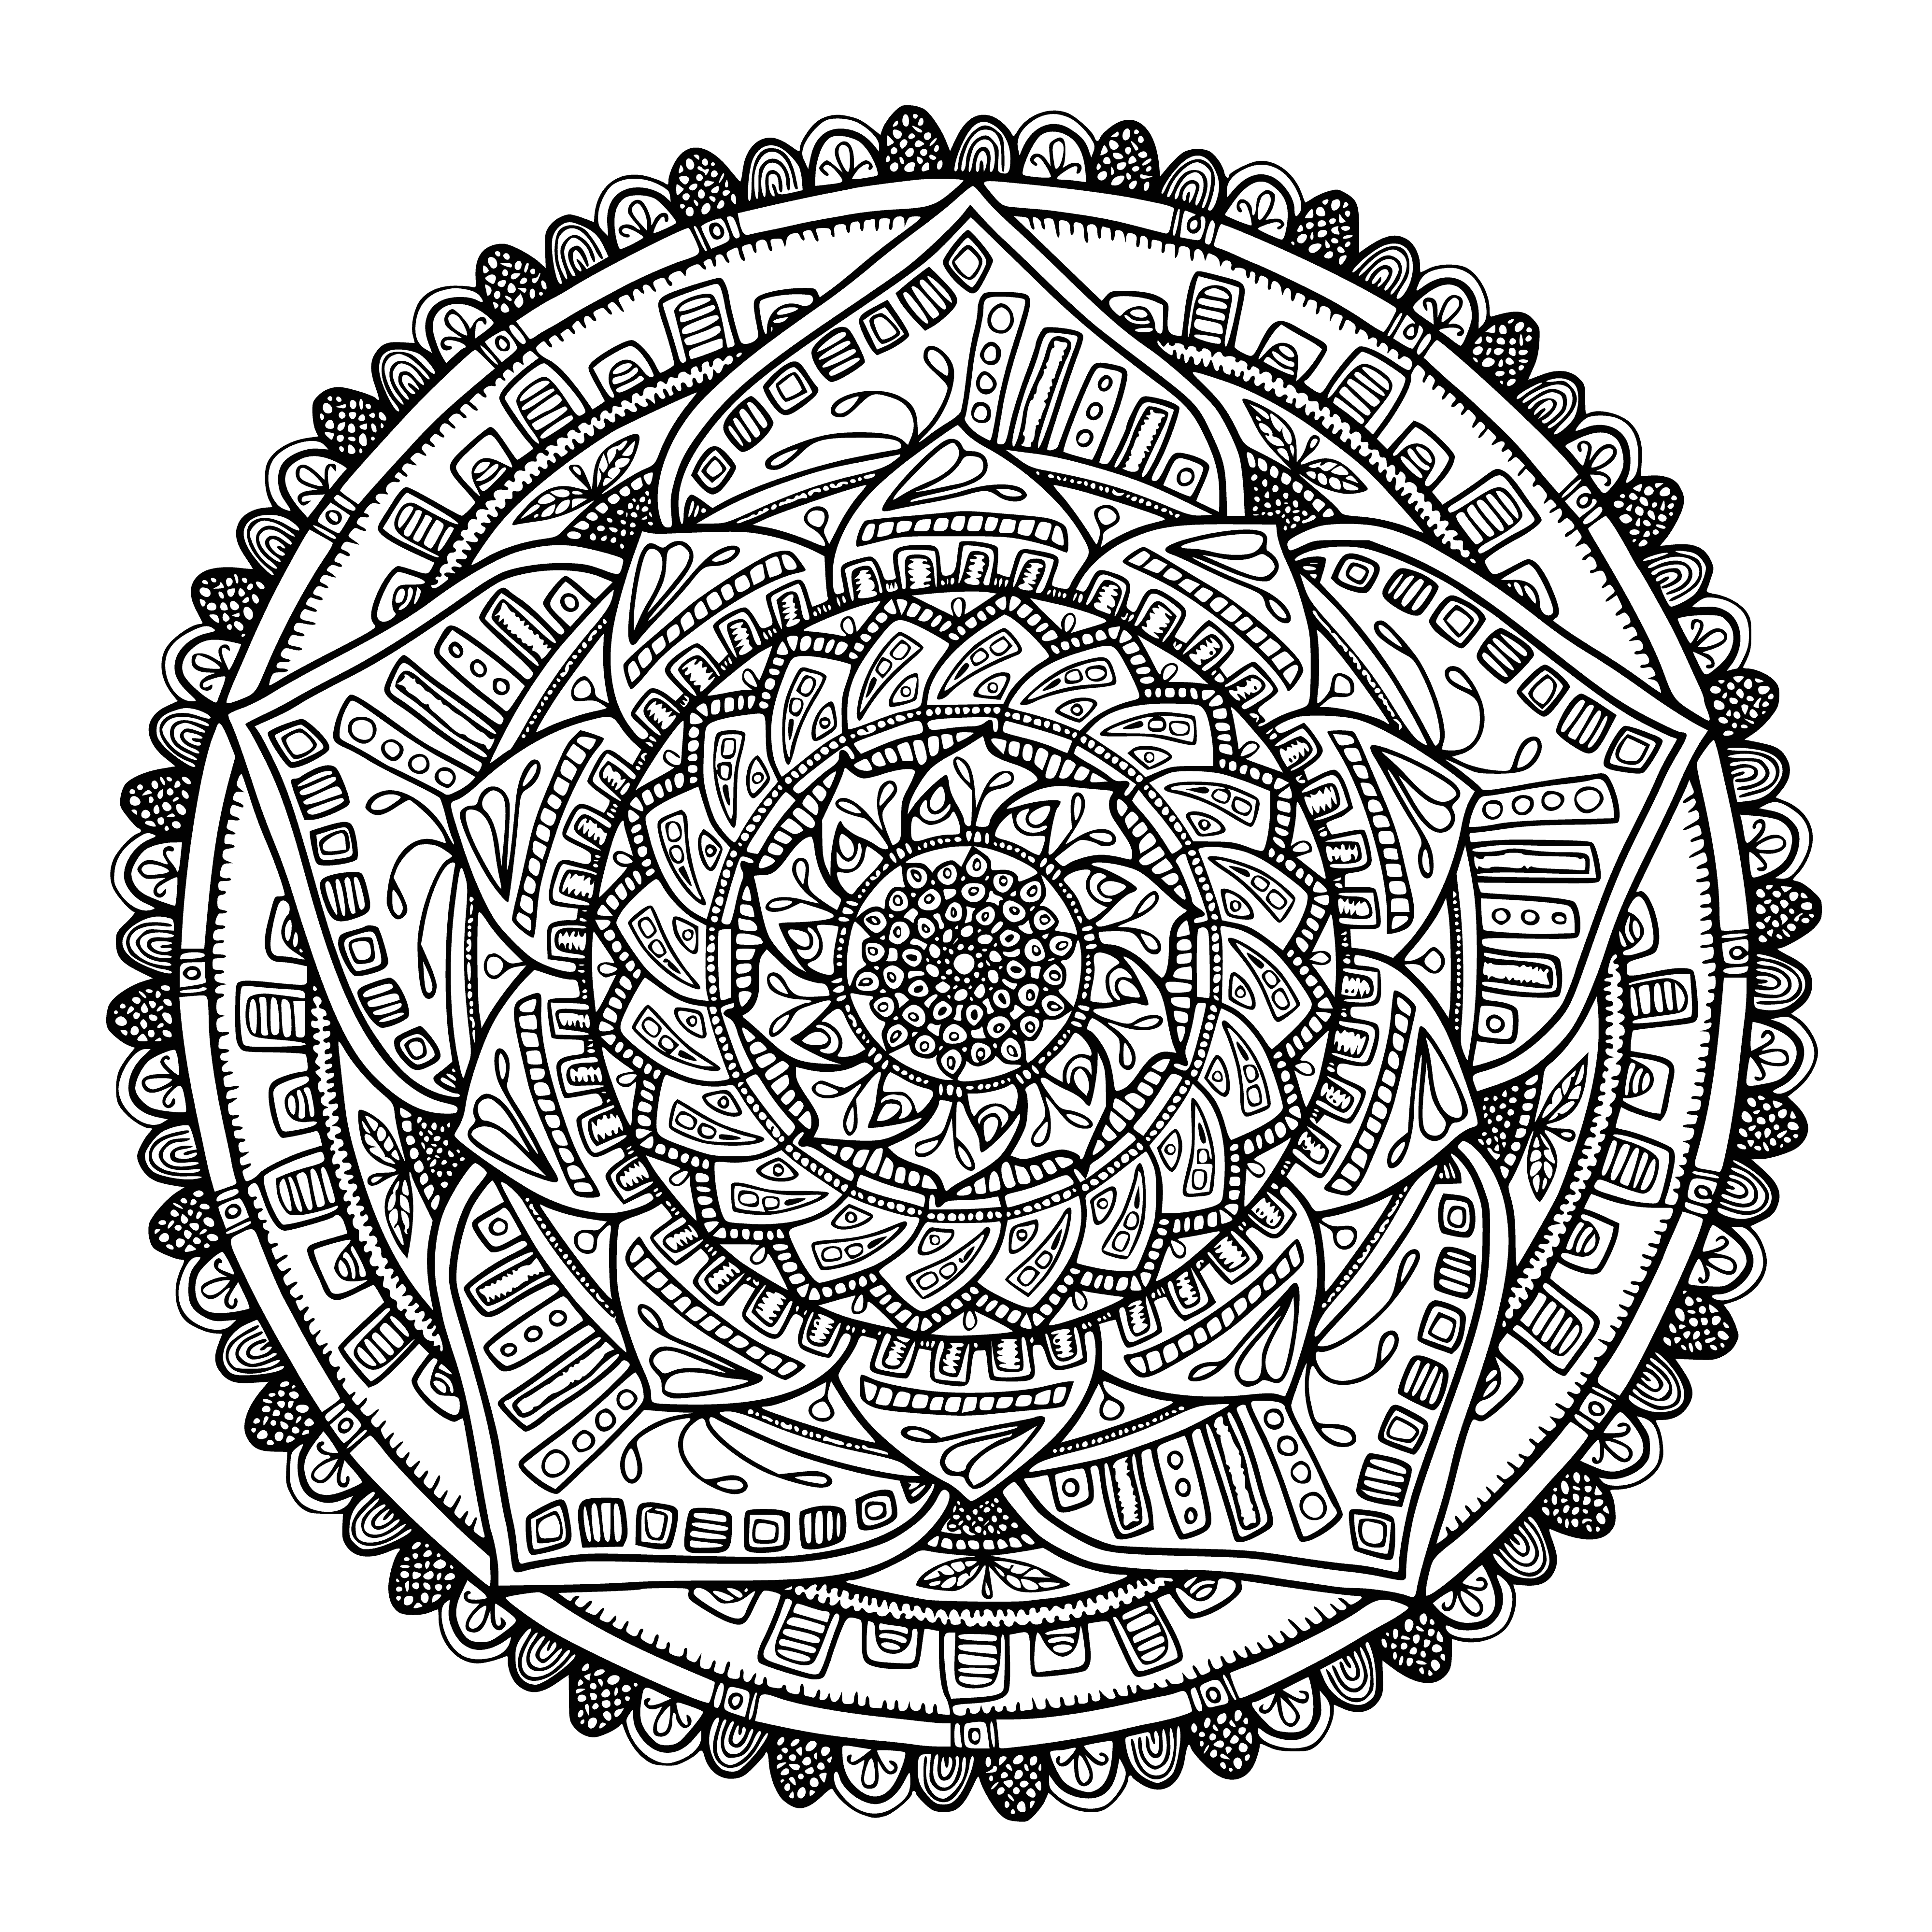 coloring page: Mandala coloring page has complex shapes & patterns, both geometric & organic, with many colors woven together. #Zen #Coloring #Relaxation